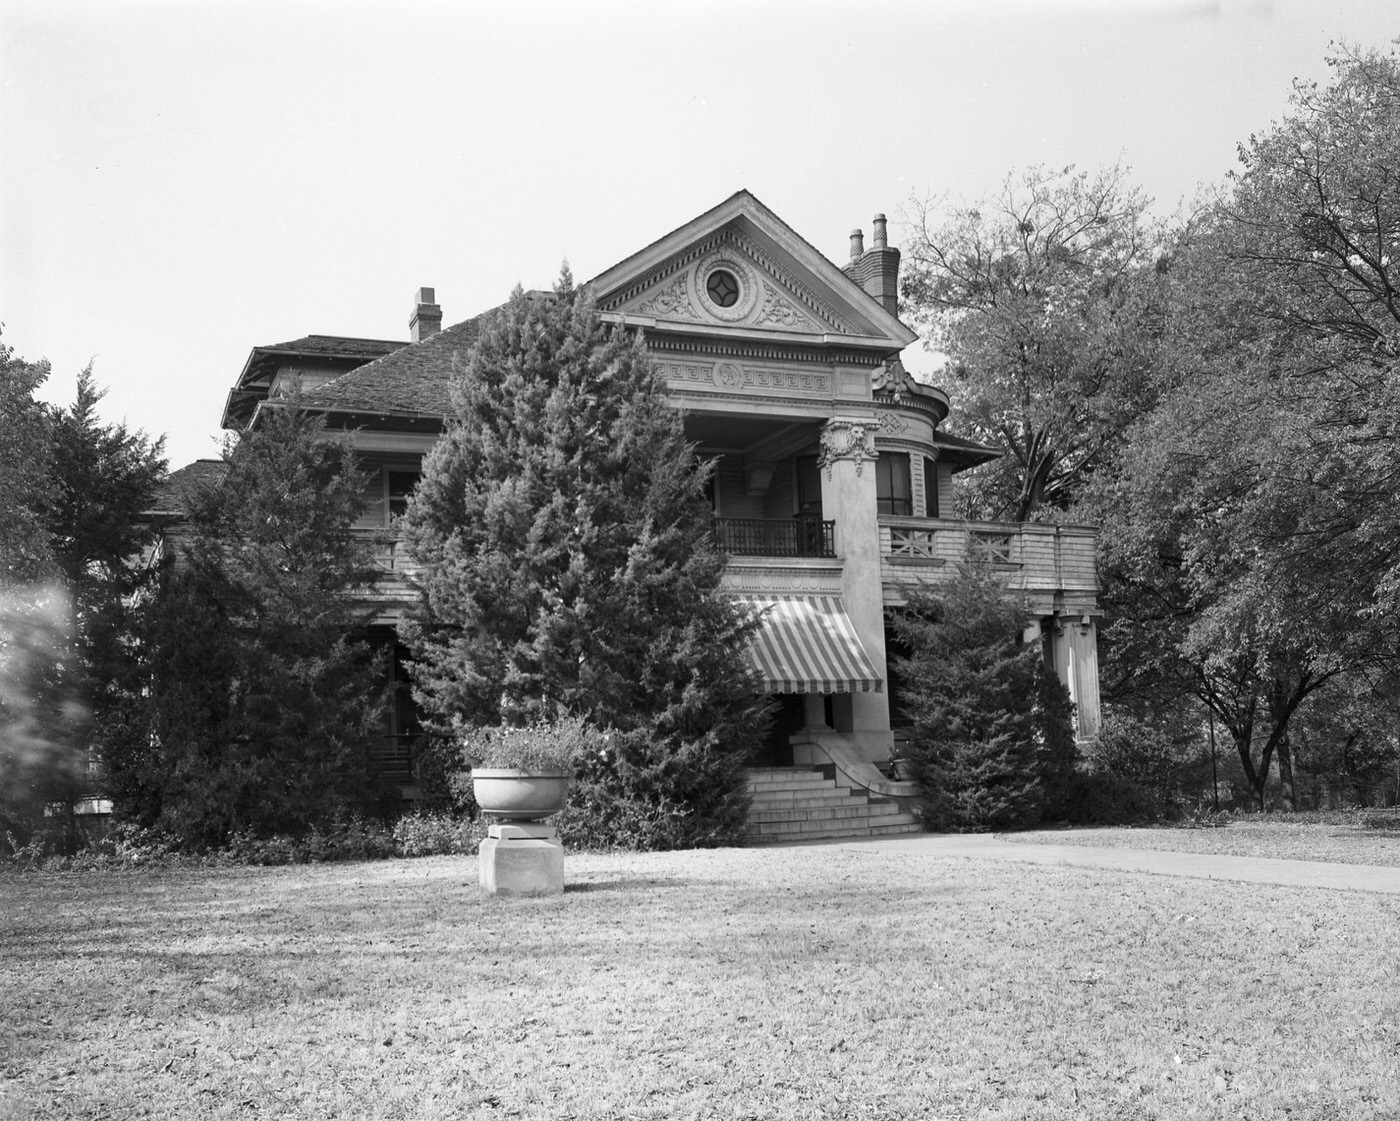 Cass Edwards house at Pennsylvania and Summit, built late 1890s and scheduled to be torn down, 1948